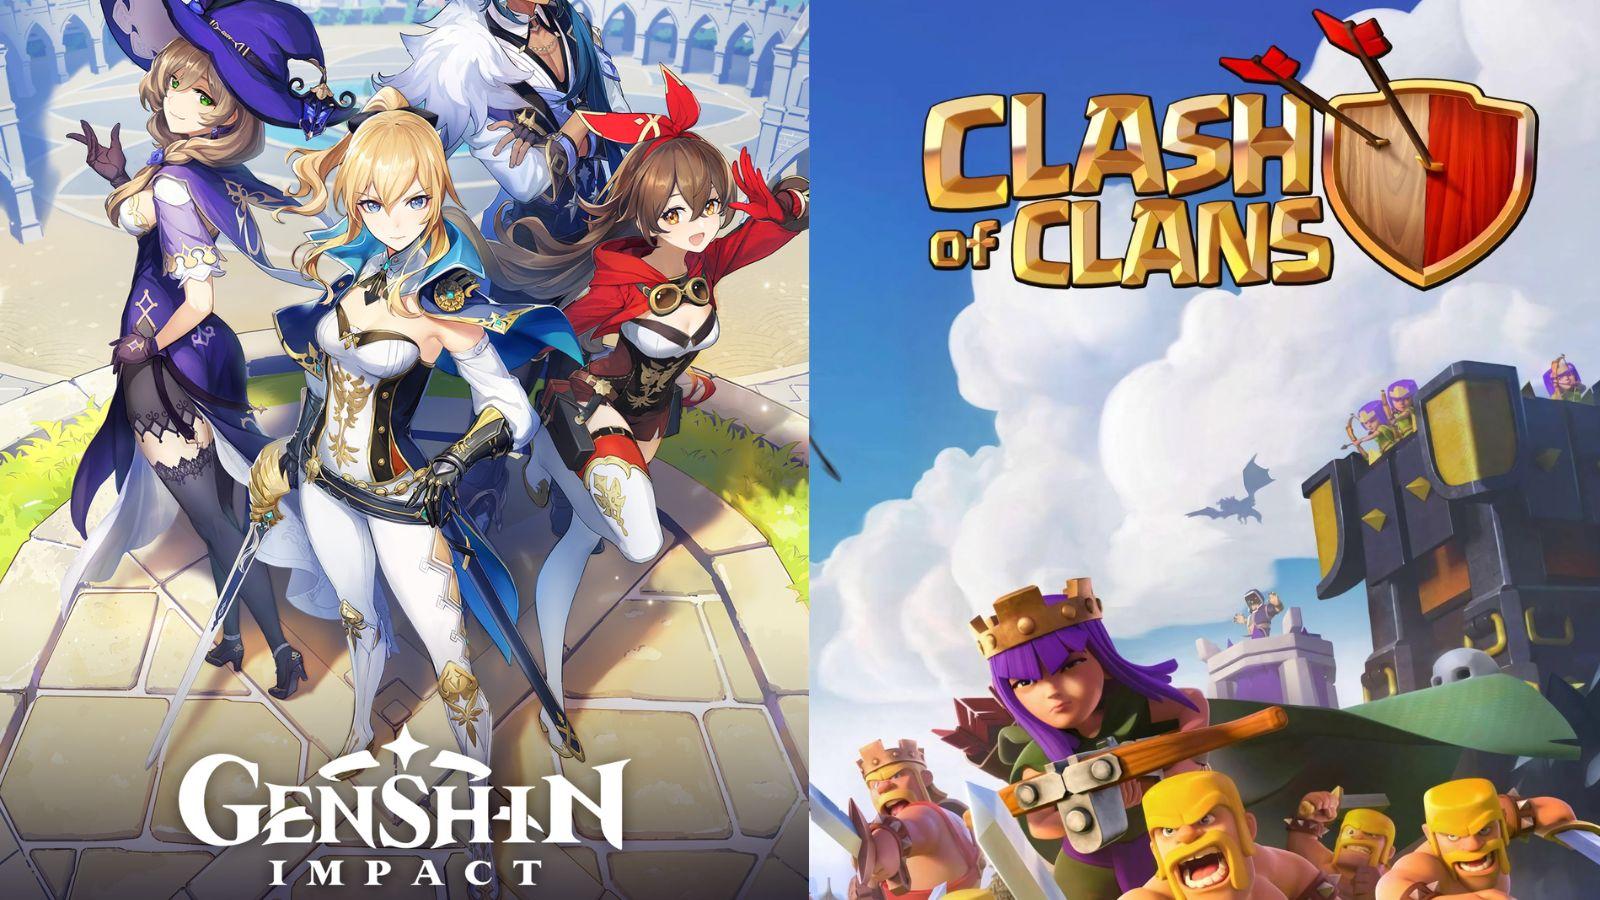 Clash of clans and Genshin Impact